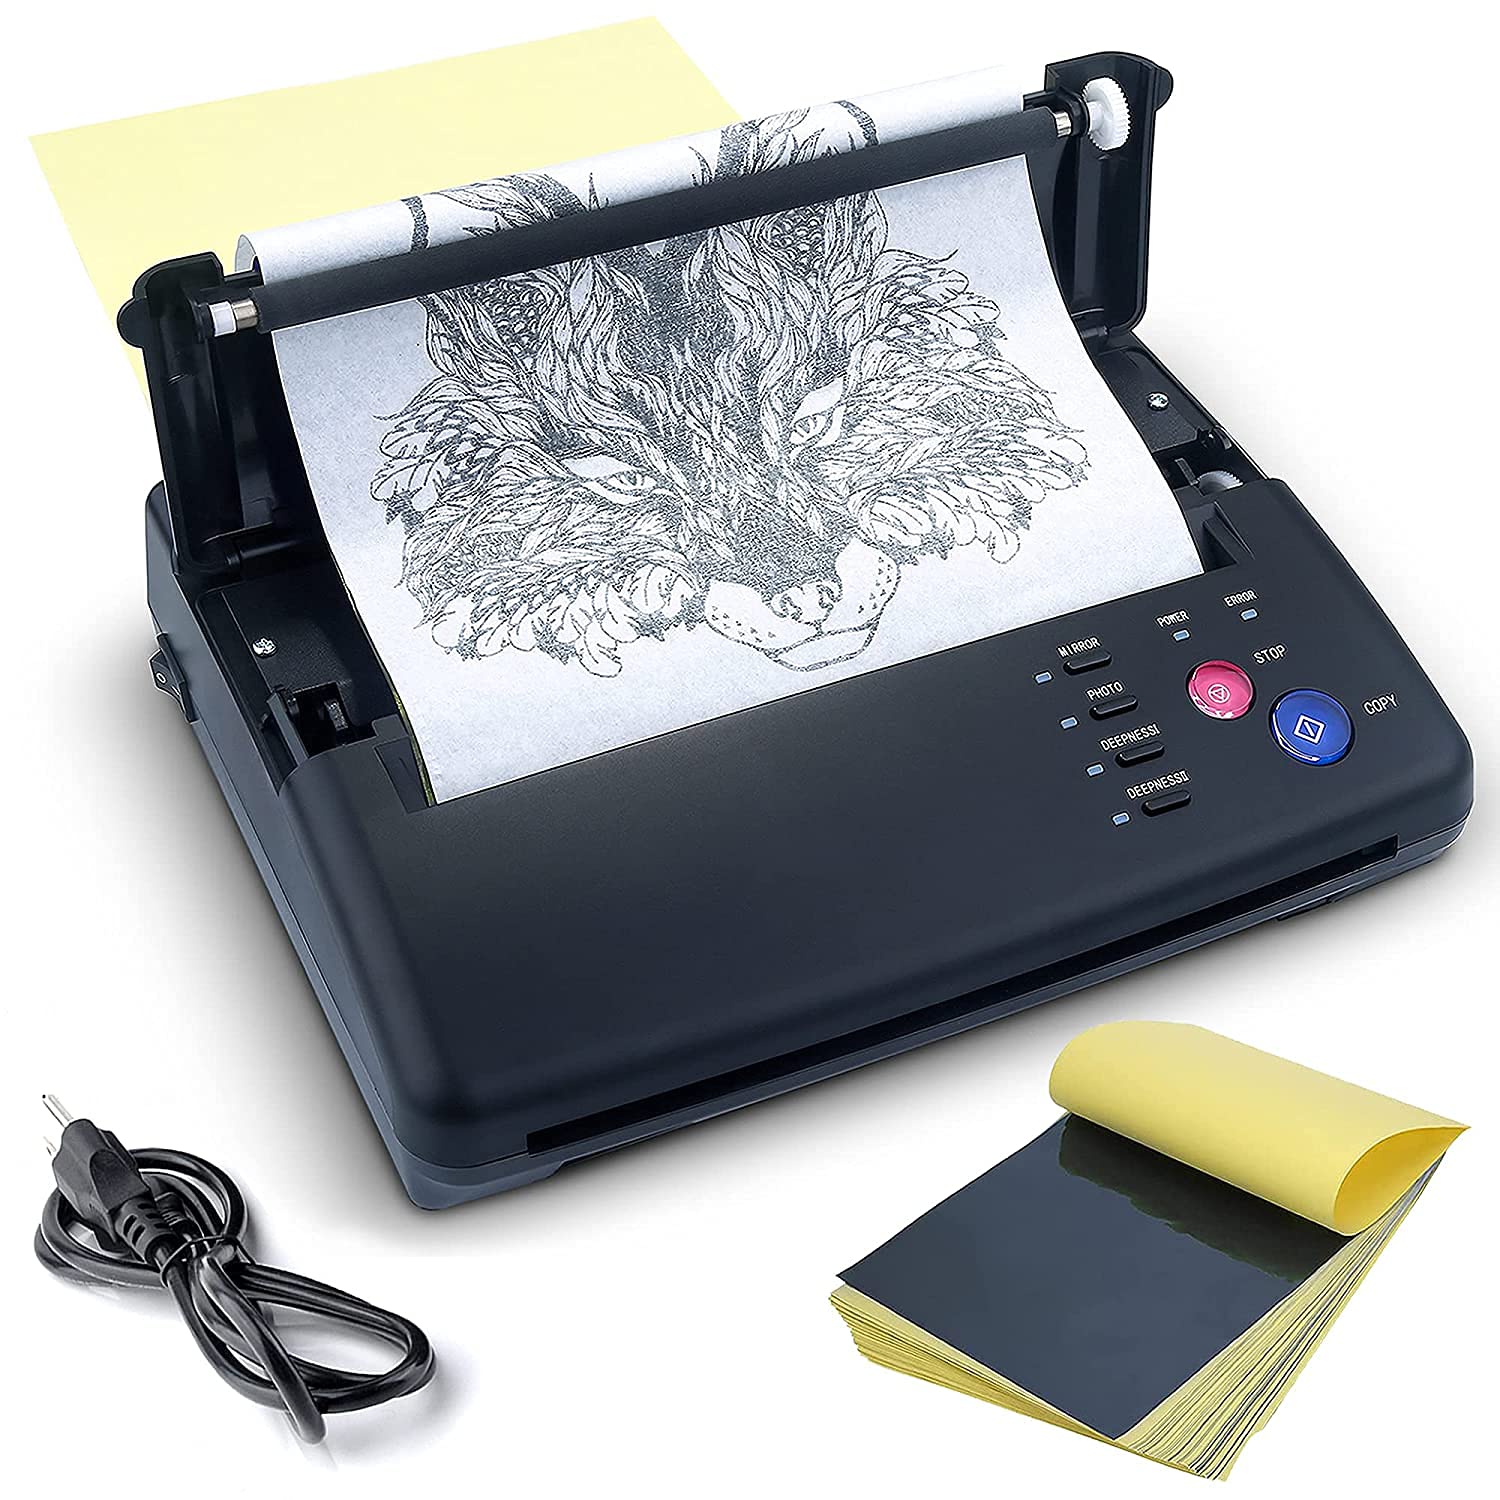 All about tattoo printer and how to choose the best one